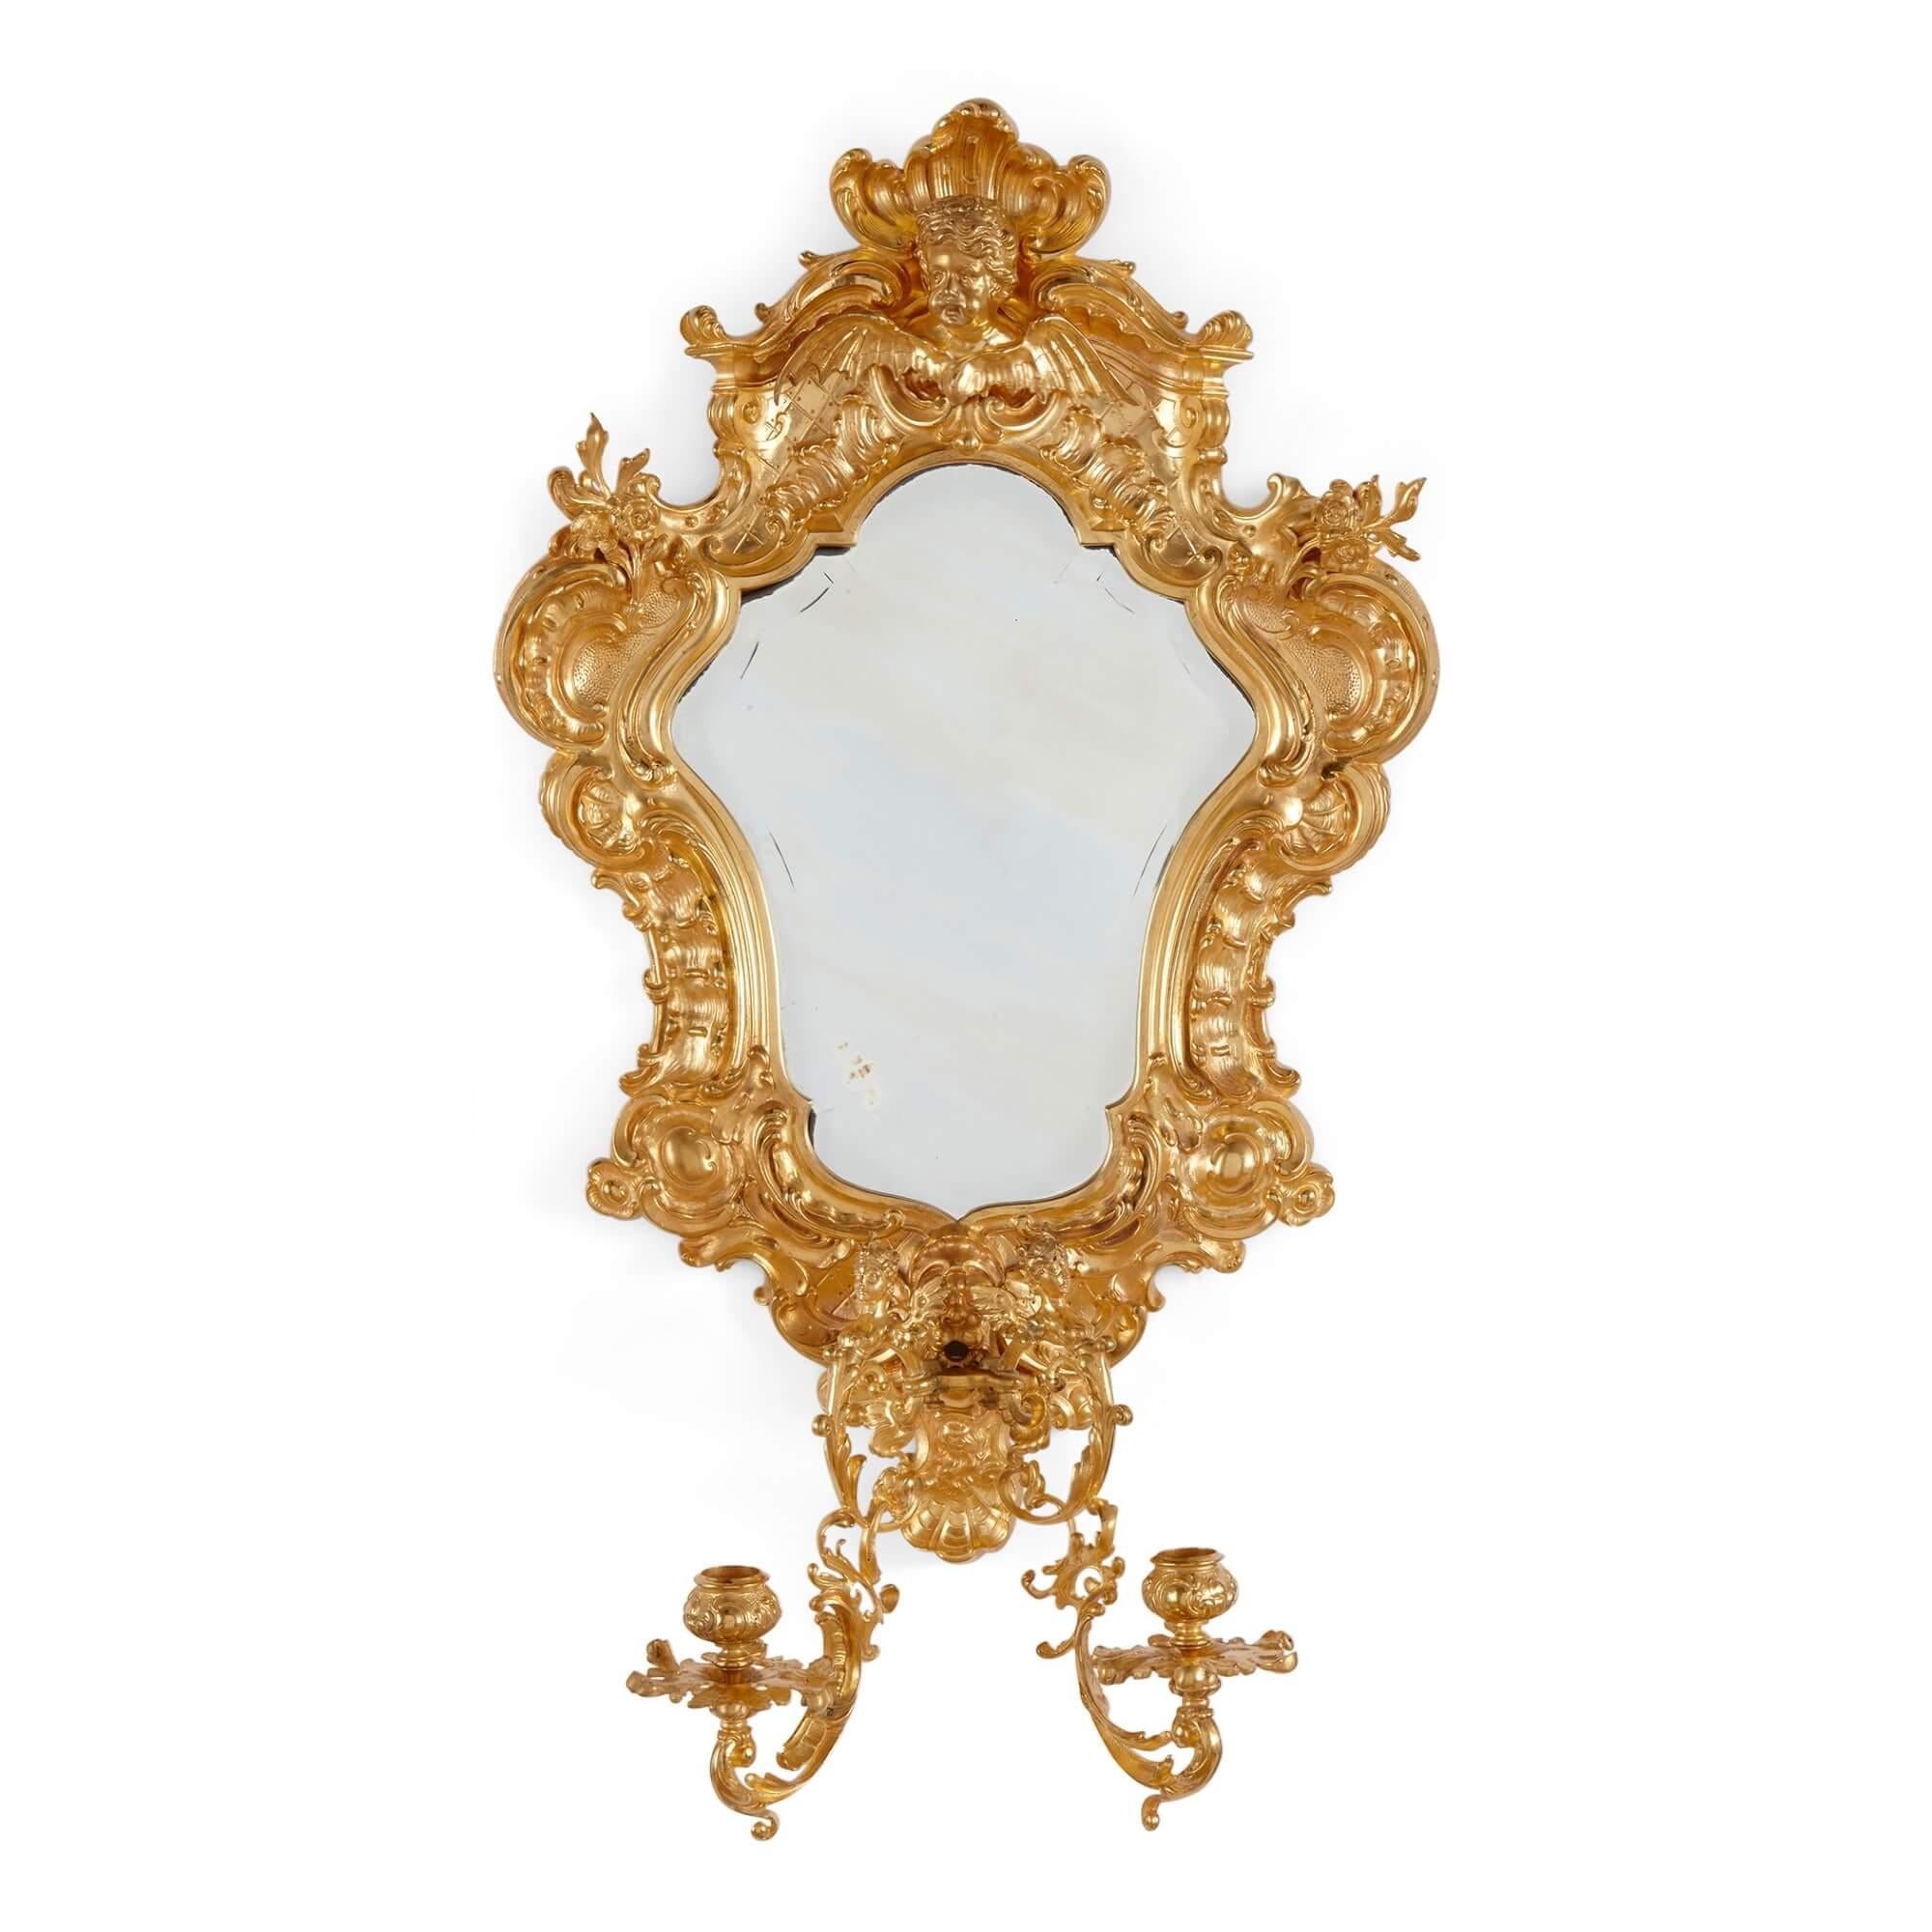 Pair of gilt bronze Baroque style wall appliques
French, late 19th Century
Height 68cm, width 39cm, depth 17cm

The appliques in this superb pair of works are wrought from gilt bronze in the Baroque style and feature mirrors and lights. Each